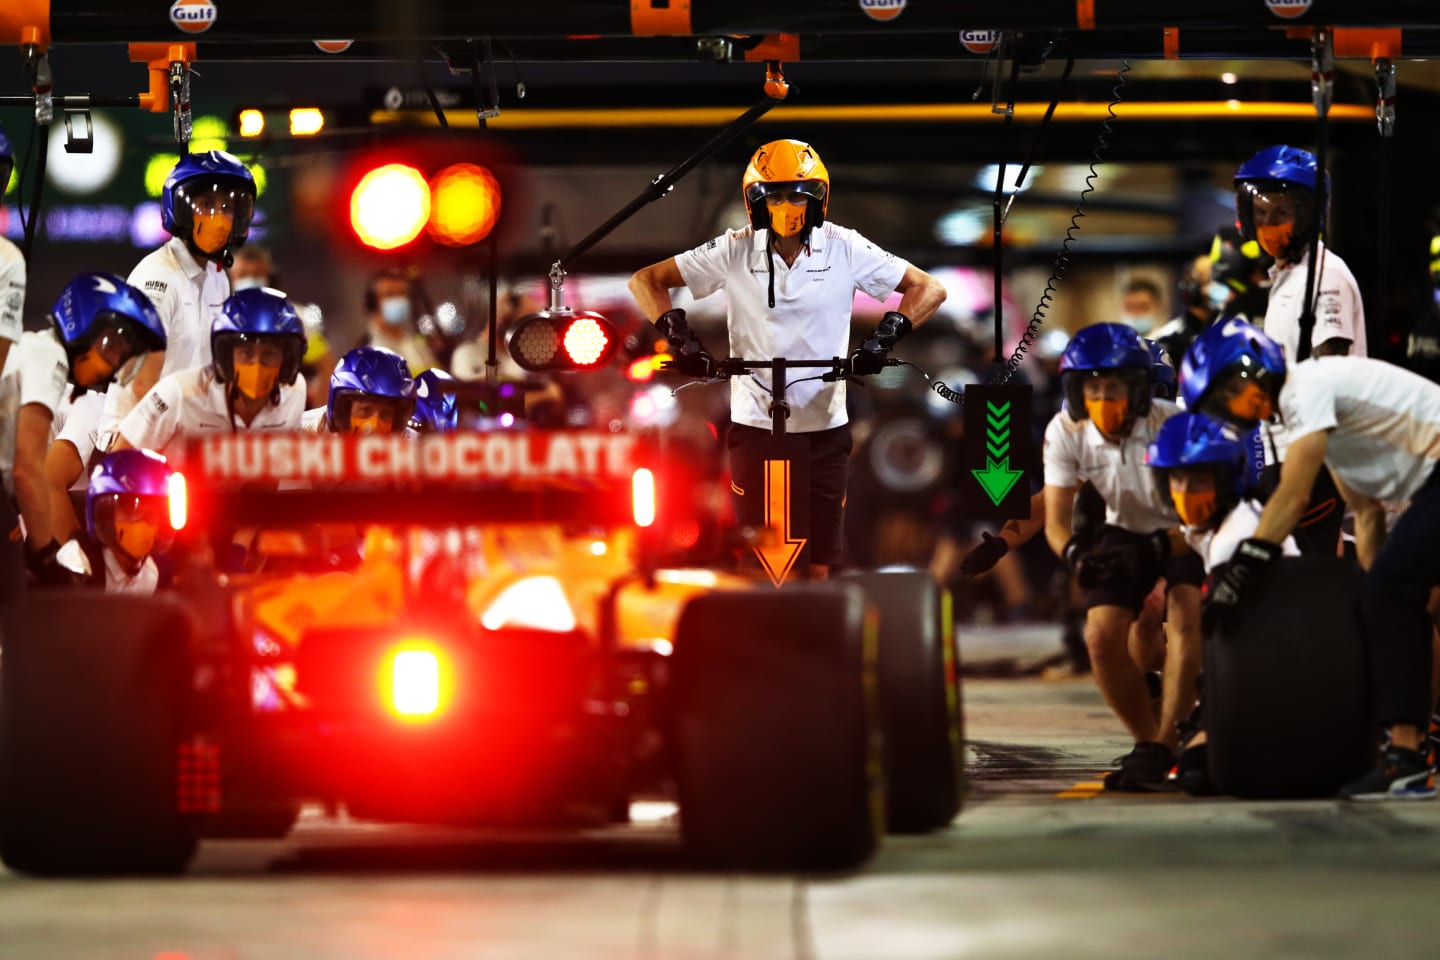 BAHRAIN, BAHRAIN - NOVEMBER 27: Carlos Sainz of Spain driving the (55) McLaren F1 Team MCL35 Renault stops in the Pitlane during practice ahead of the F1 Grand Prix of Bahrain at Bahrain International Circuit on November 27, 2020 in Bahrain, Bahrain. (Photo by Mark Thompson/Getty Images)